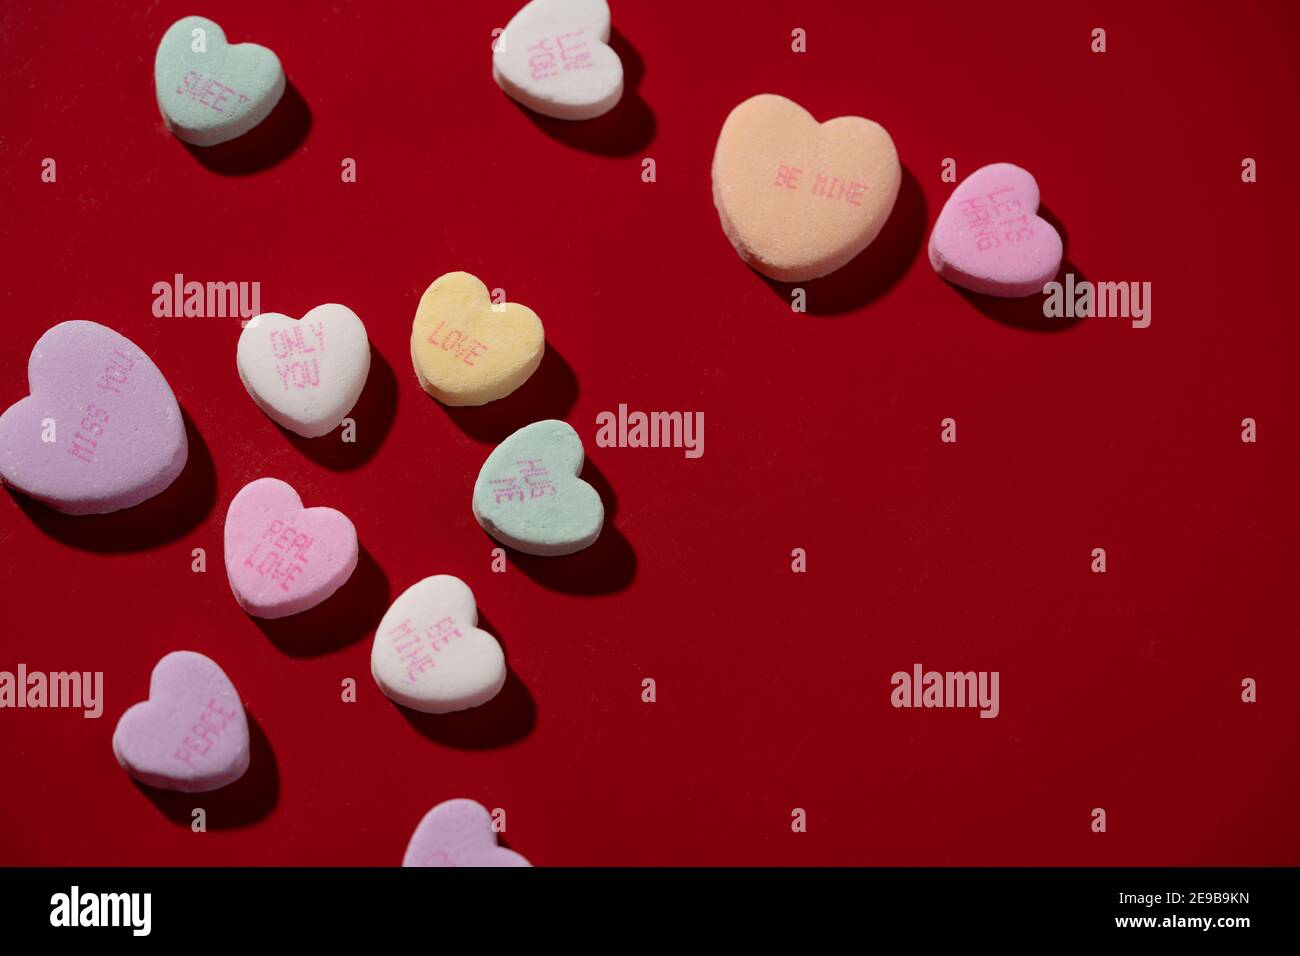 Colorful conversation candy hearts arranged on a red surface. Stock Photo